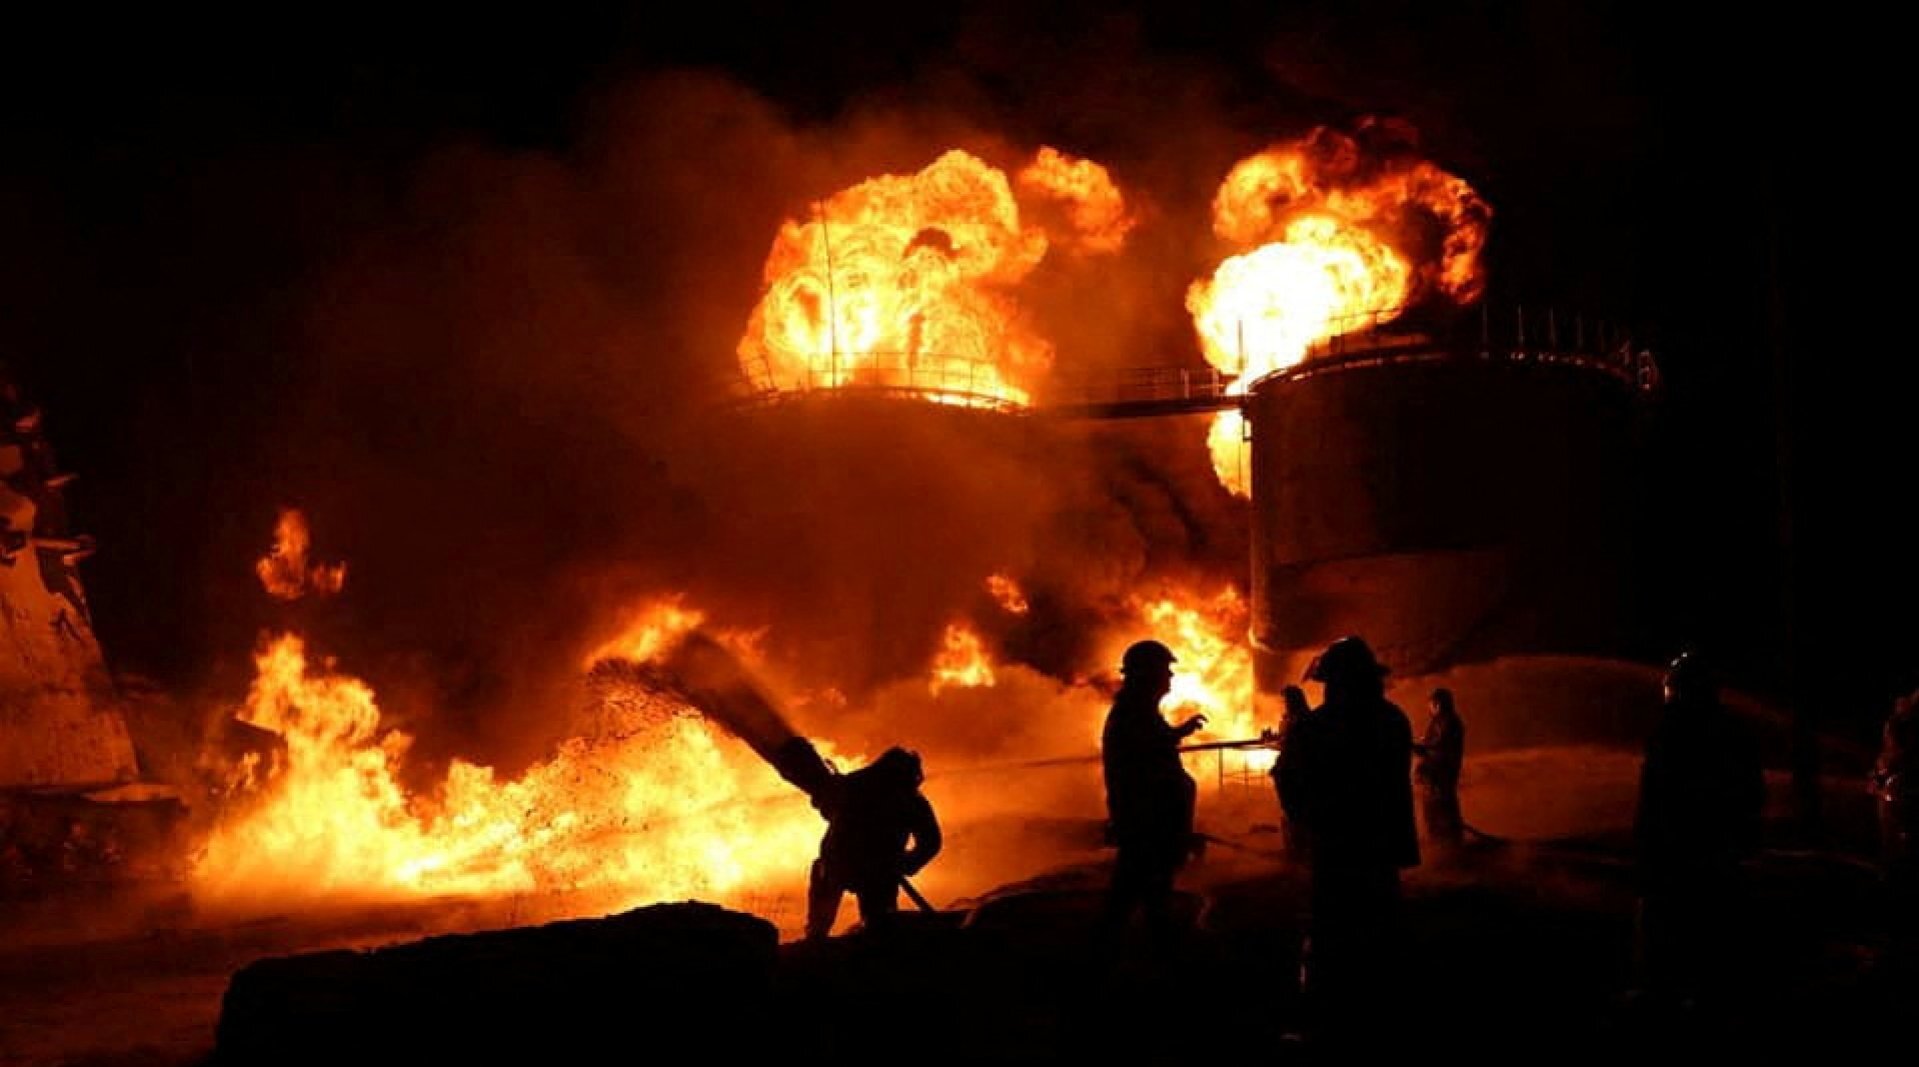 Firefighters battle to extinguish a blaze at a fuel storage facility damaged by an airstrike in Ukraine’s Dnipropetrovsk region on April 6. Photo: State Emergency Service of Ukraine via Reuters